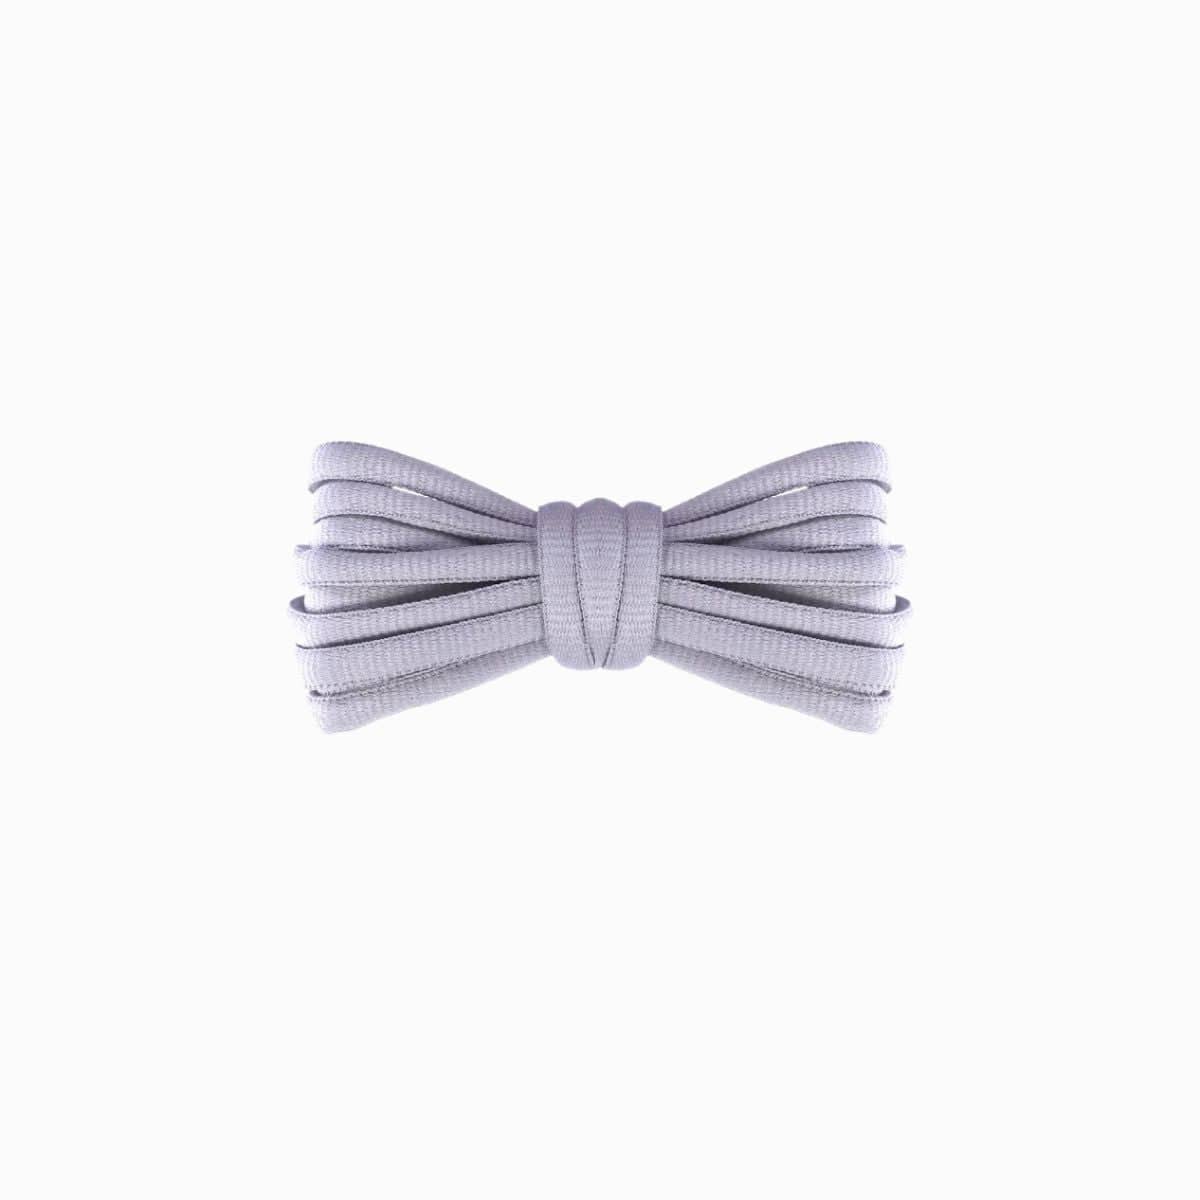 Nike_TN_Replacement_Shoelaces_Light_Grey